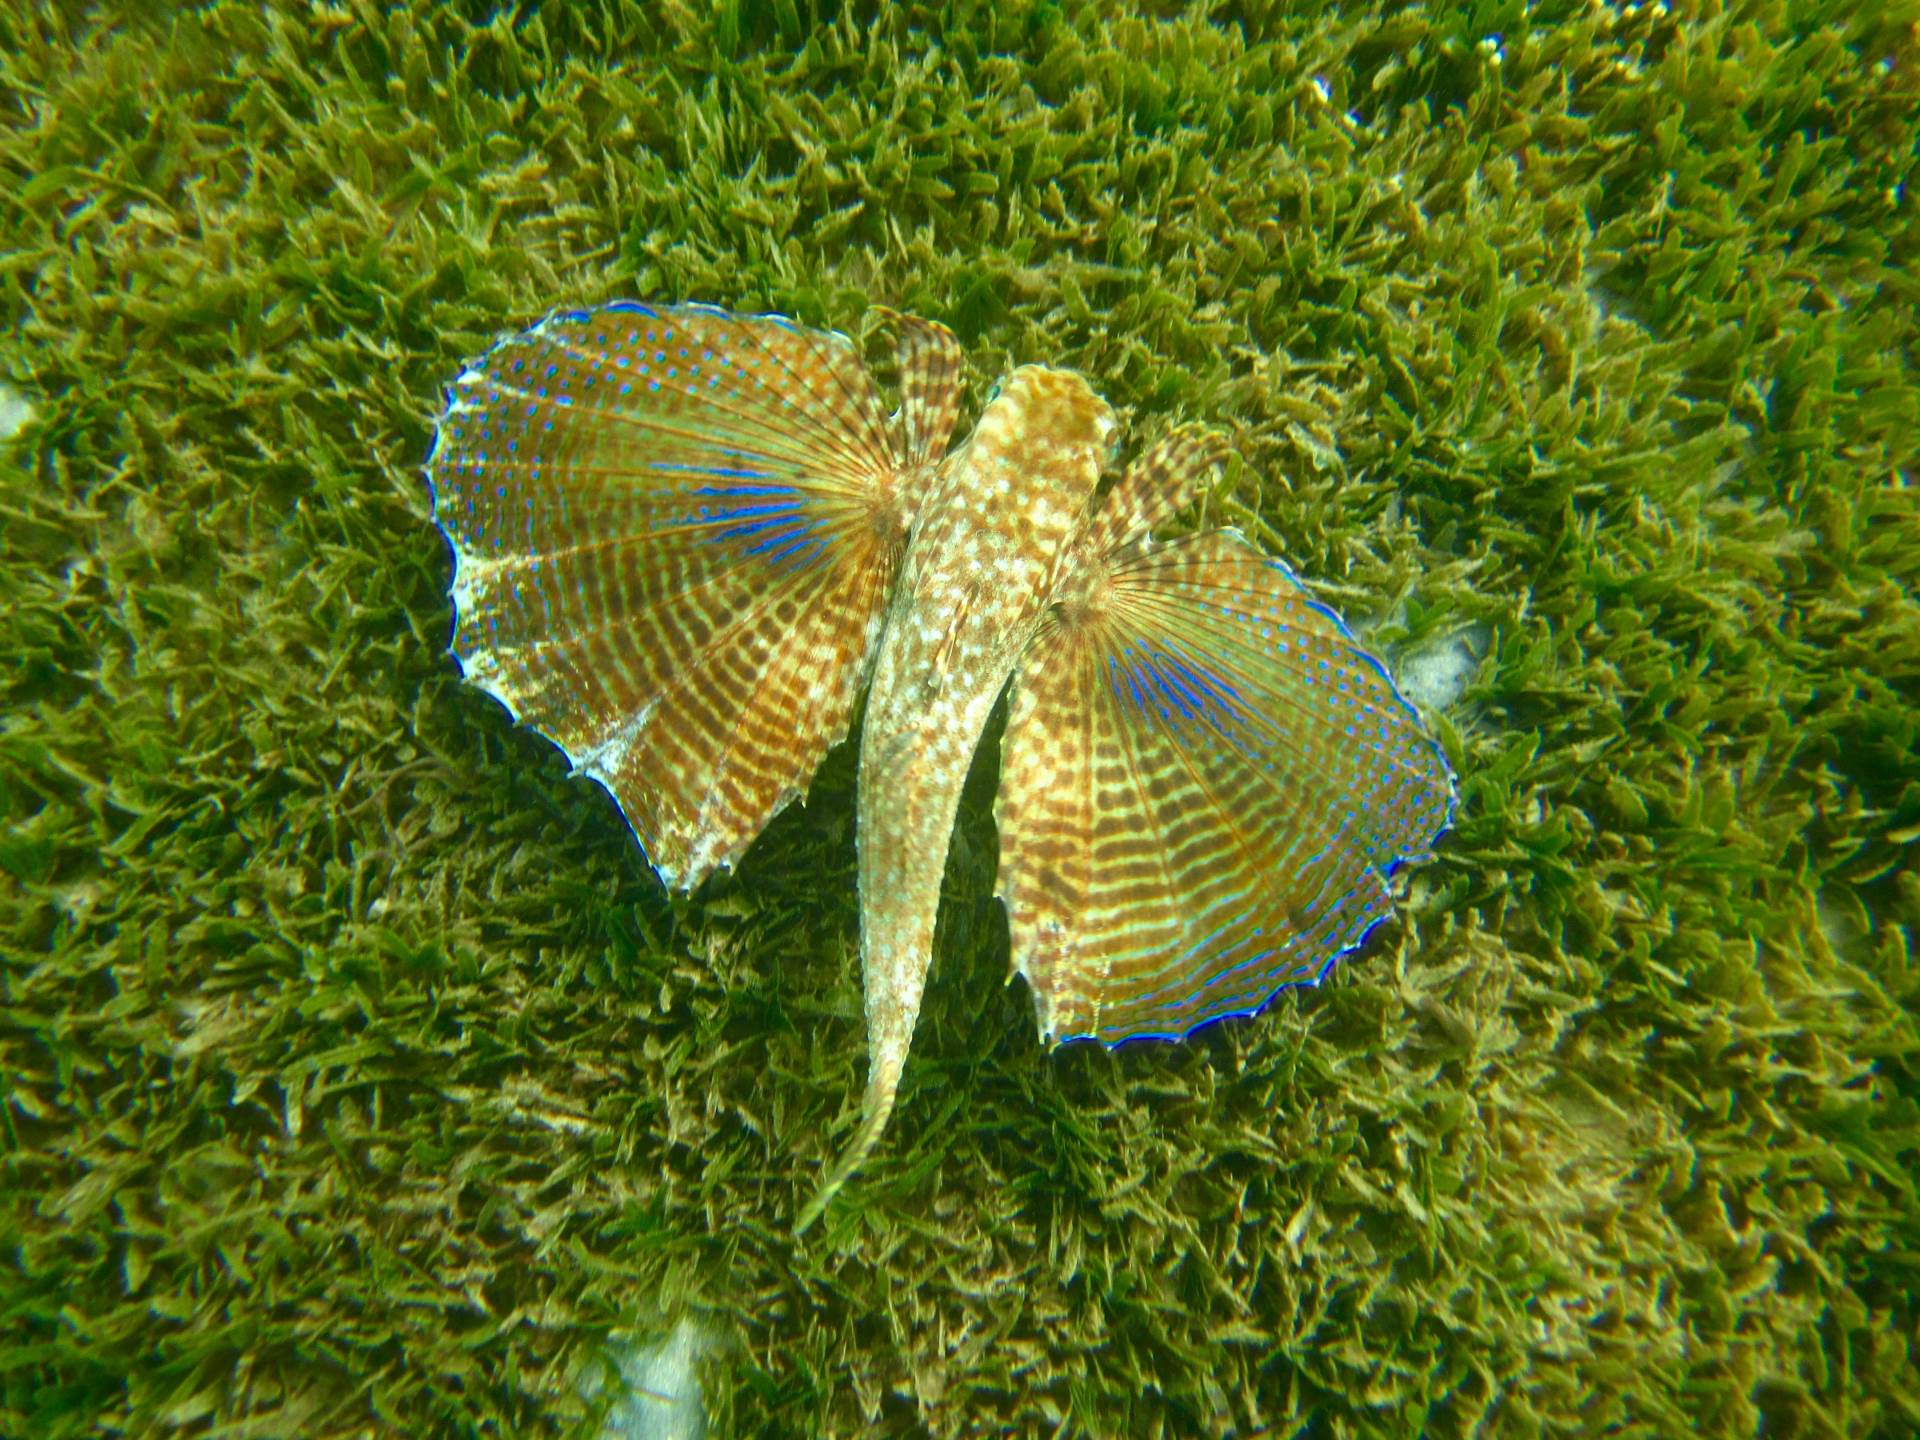 Please feature this photo on your instagram (photo credits go to @photographylife.4u)

a flying gurnard in nevis